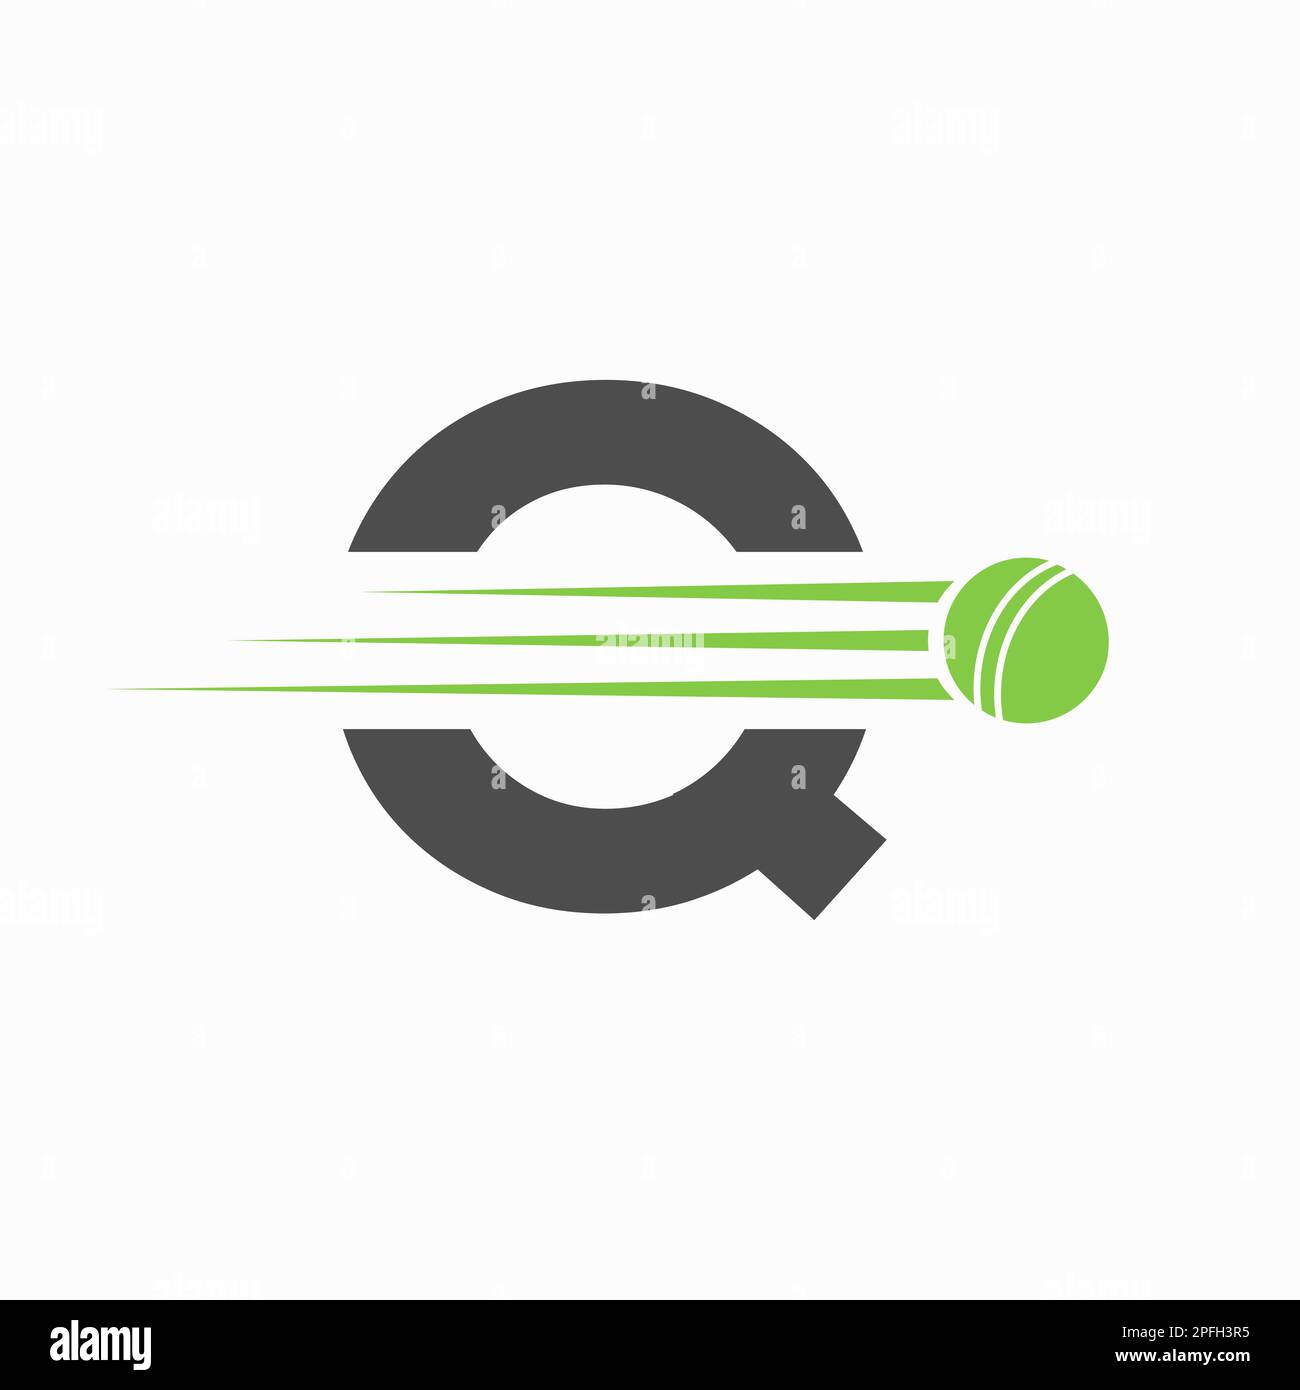 Initial Letter Q Cricket Logo Concept With Ball Icon For Cricket Club Symbol Stock Vector